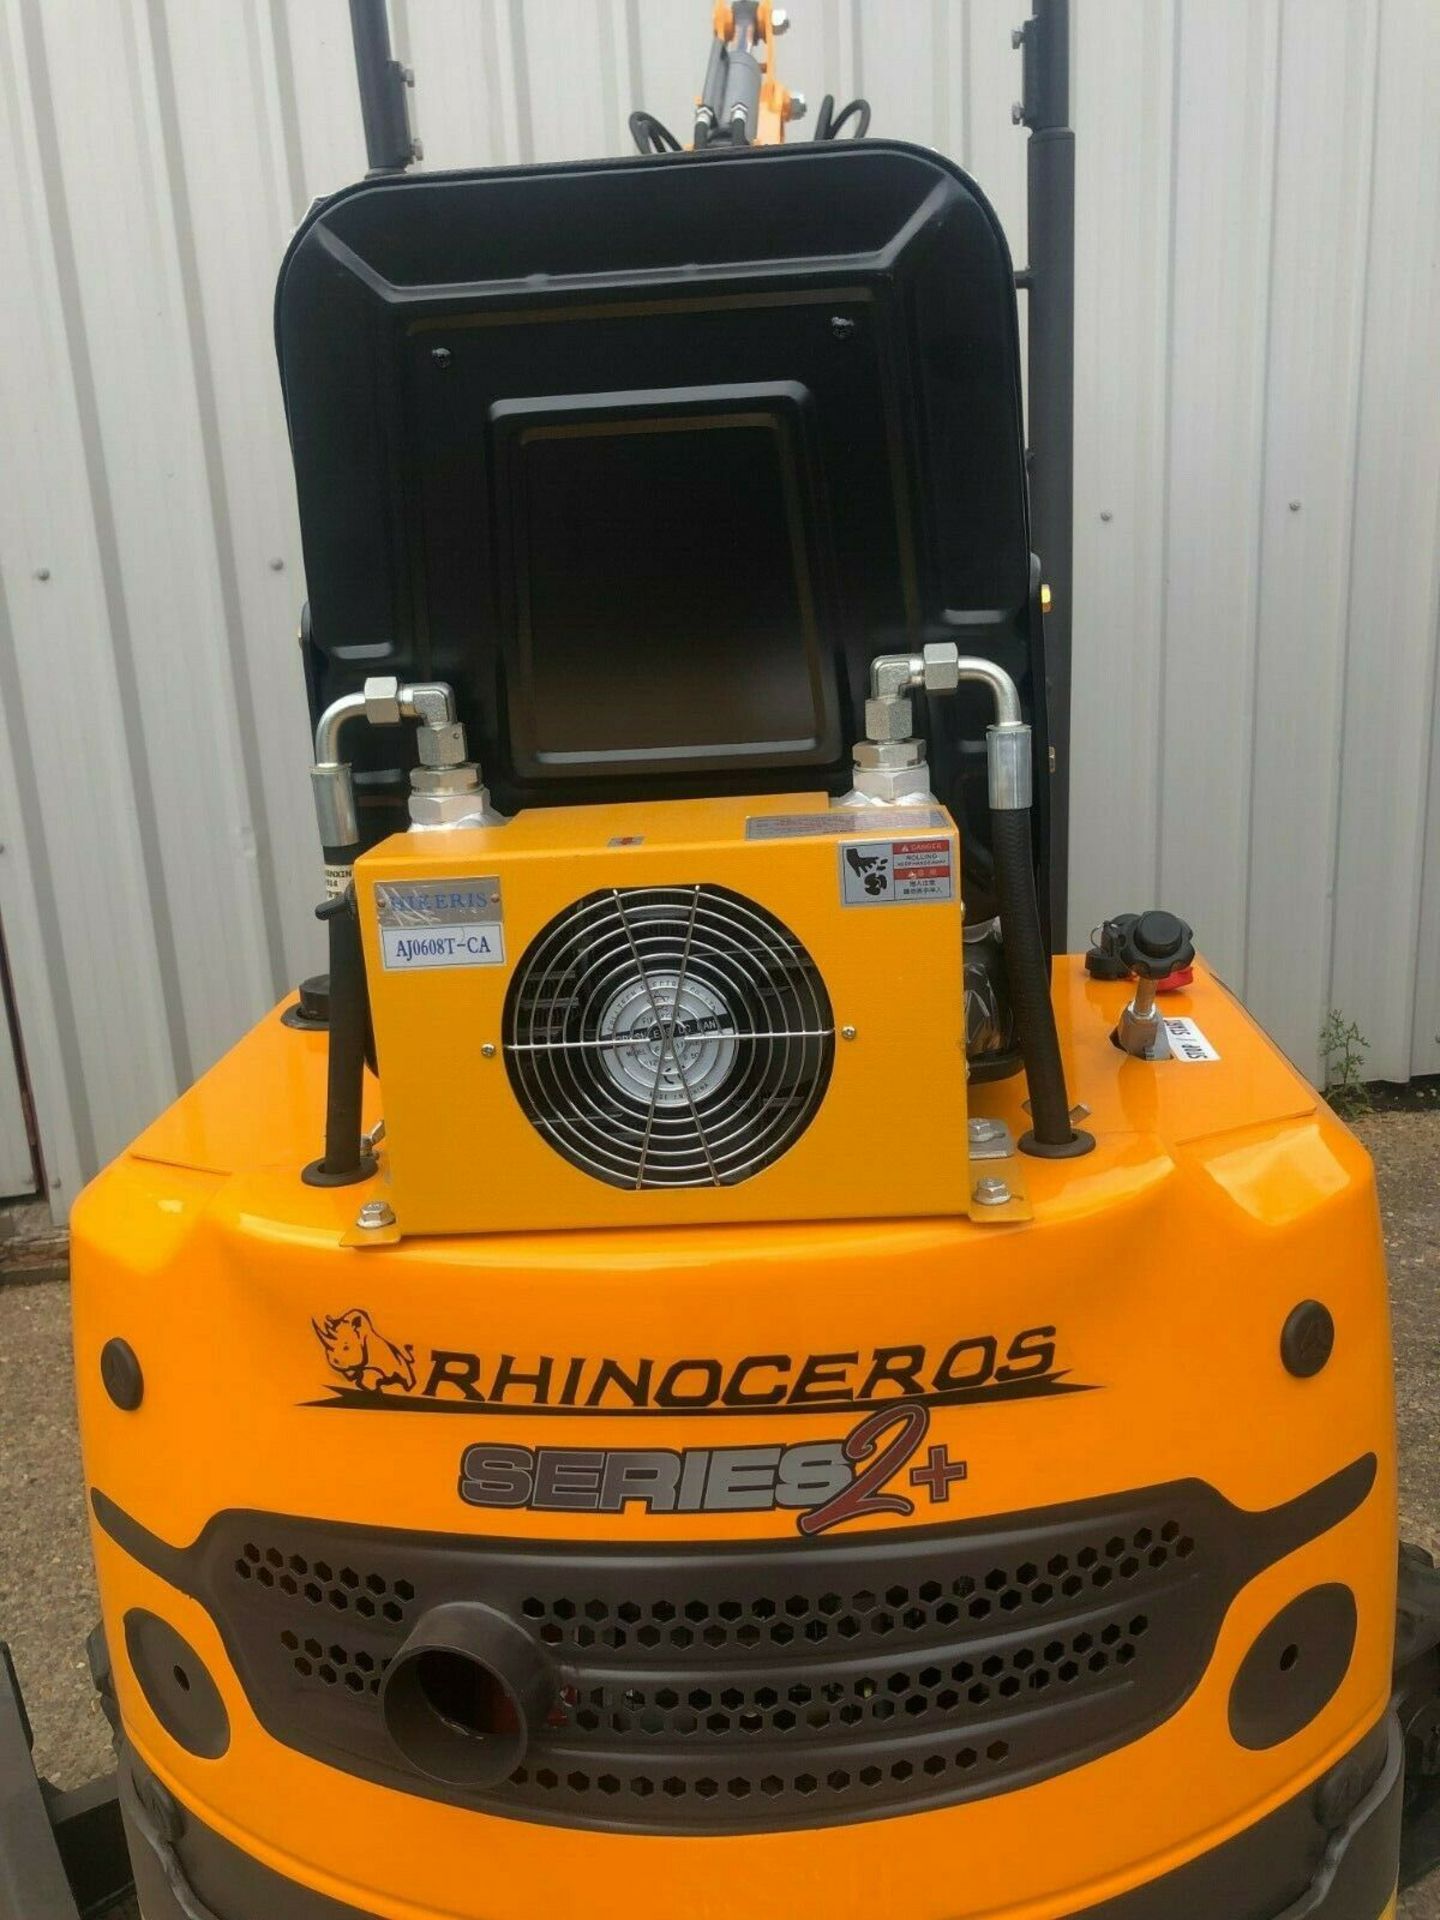 2019 MINI DIGGER RHINOCEROS XN08, LATEST MODEL SERIES 2 PLUS INTER-COOLER, 3 BUCKETS, CE MARKED - Image 8 of 8